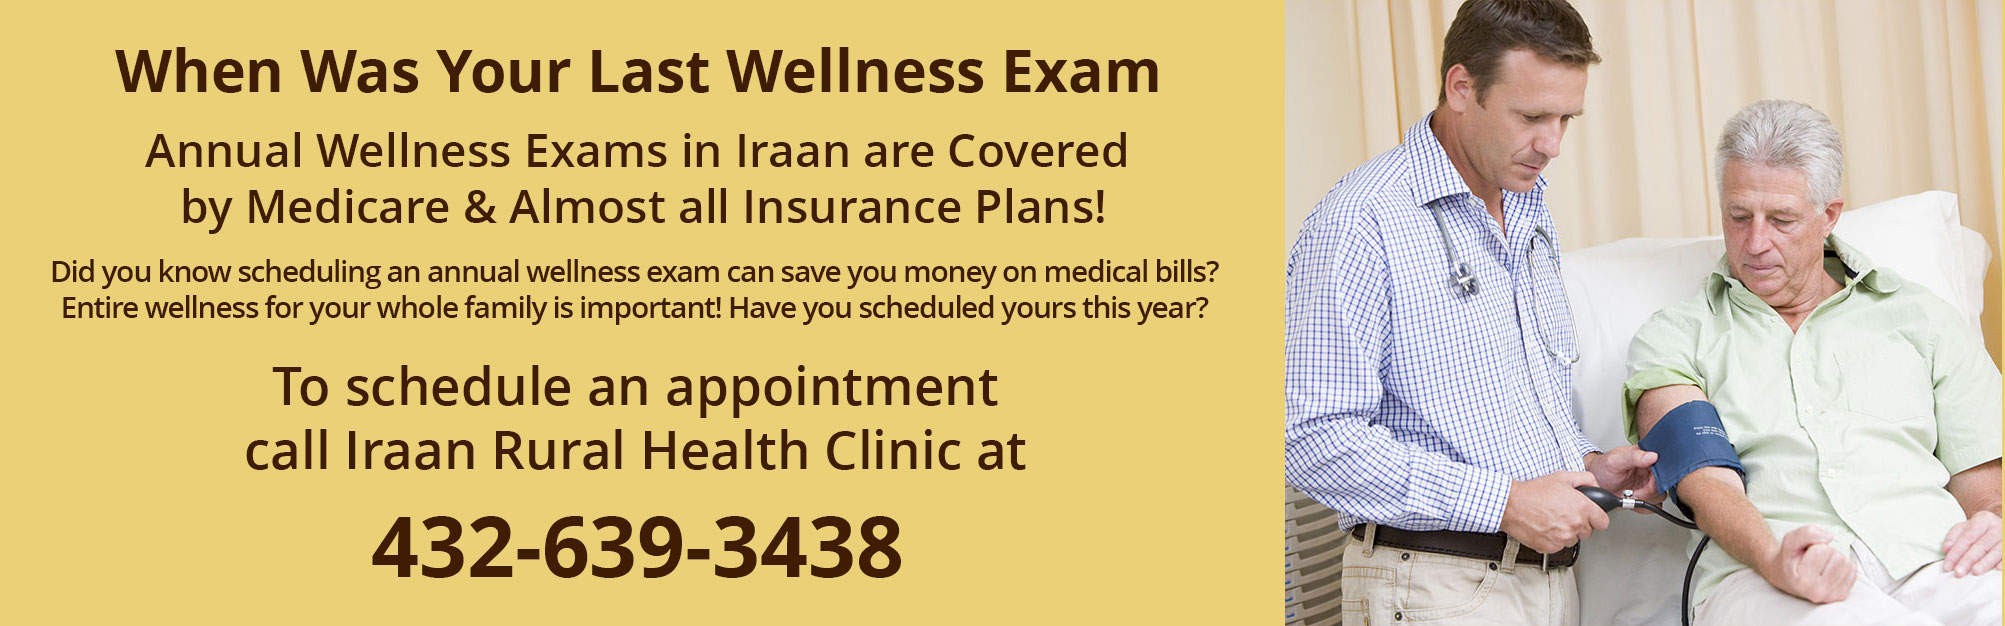 When Was Your Last Wellness Exam
Annual Wellness Exams in Iraan are Covered by Medicare & Almost all Insurance Plans!

Did you know scheduling an annual wellness exam can save you money on medical bills? Entire wellness for your whole family is important! Have you scheduled yours this year?

To schedule an appointment
call Iraan Rural Health Clinic at 432-639